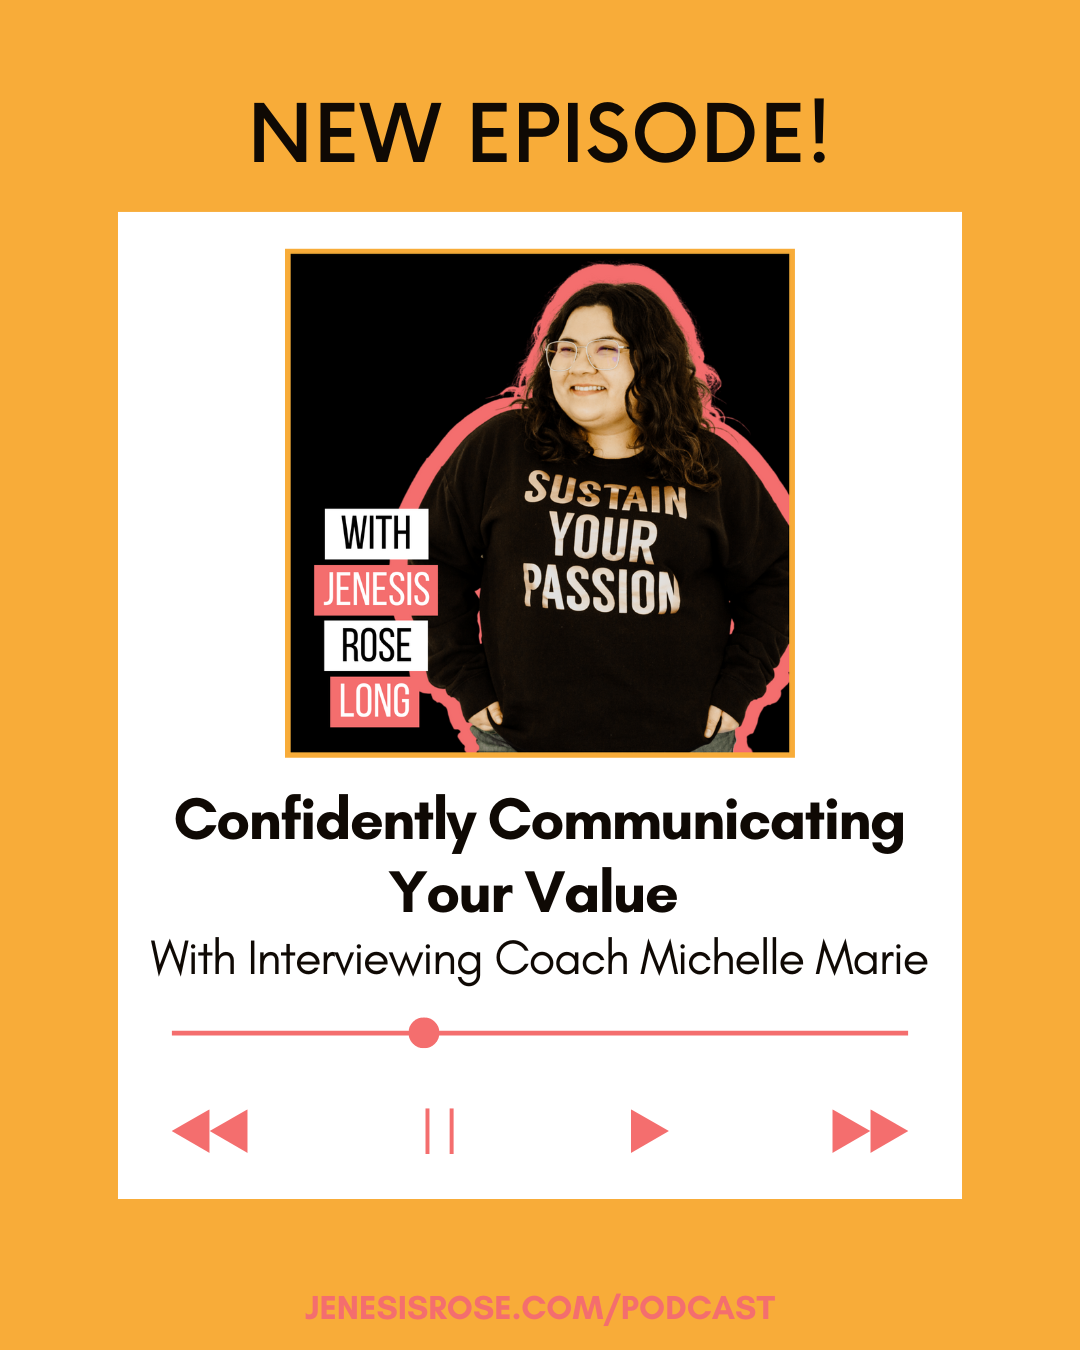 Confidently Communicating Your Value with Interviewing Coach Michelle Marie